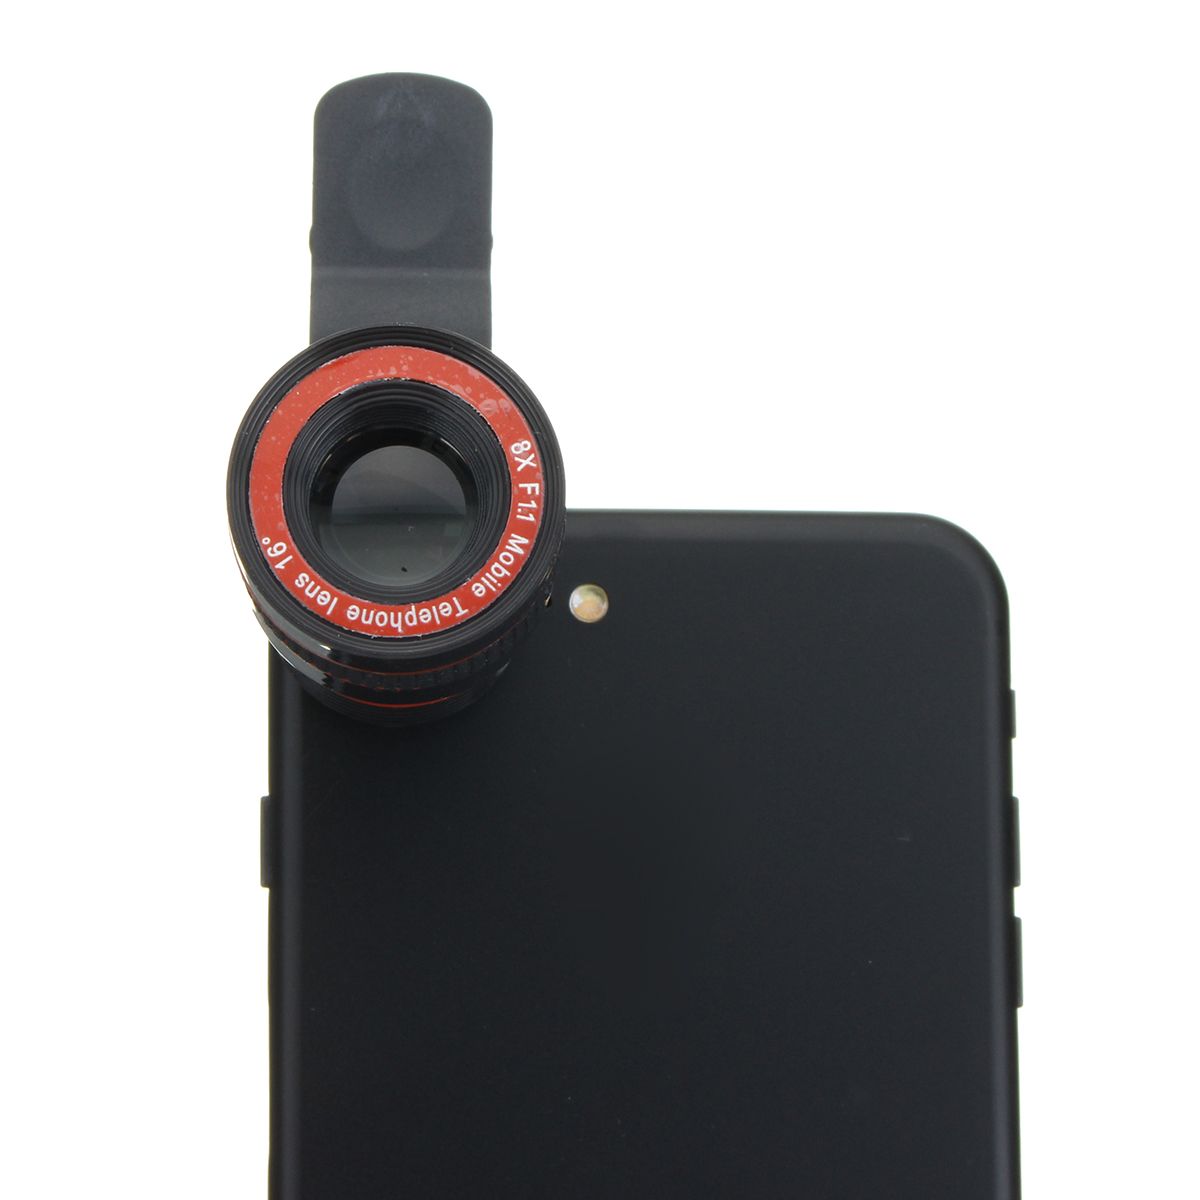 8X-Zoom-Black-Phone-Telescope-Telephoto-Lens-with-Clip-for-iPhone-Samsung-1220429